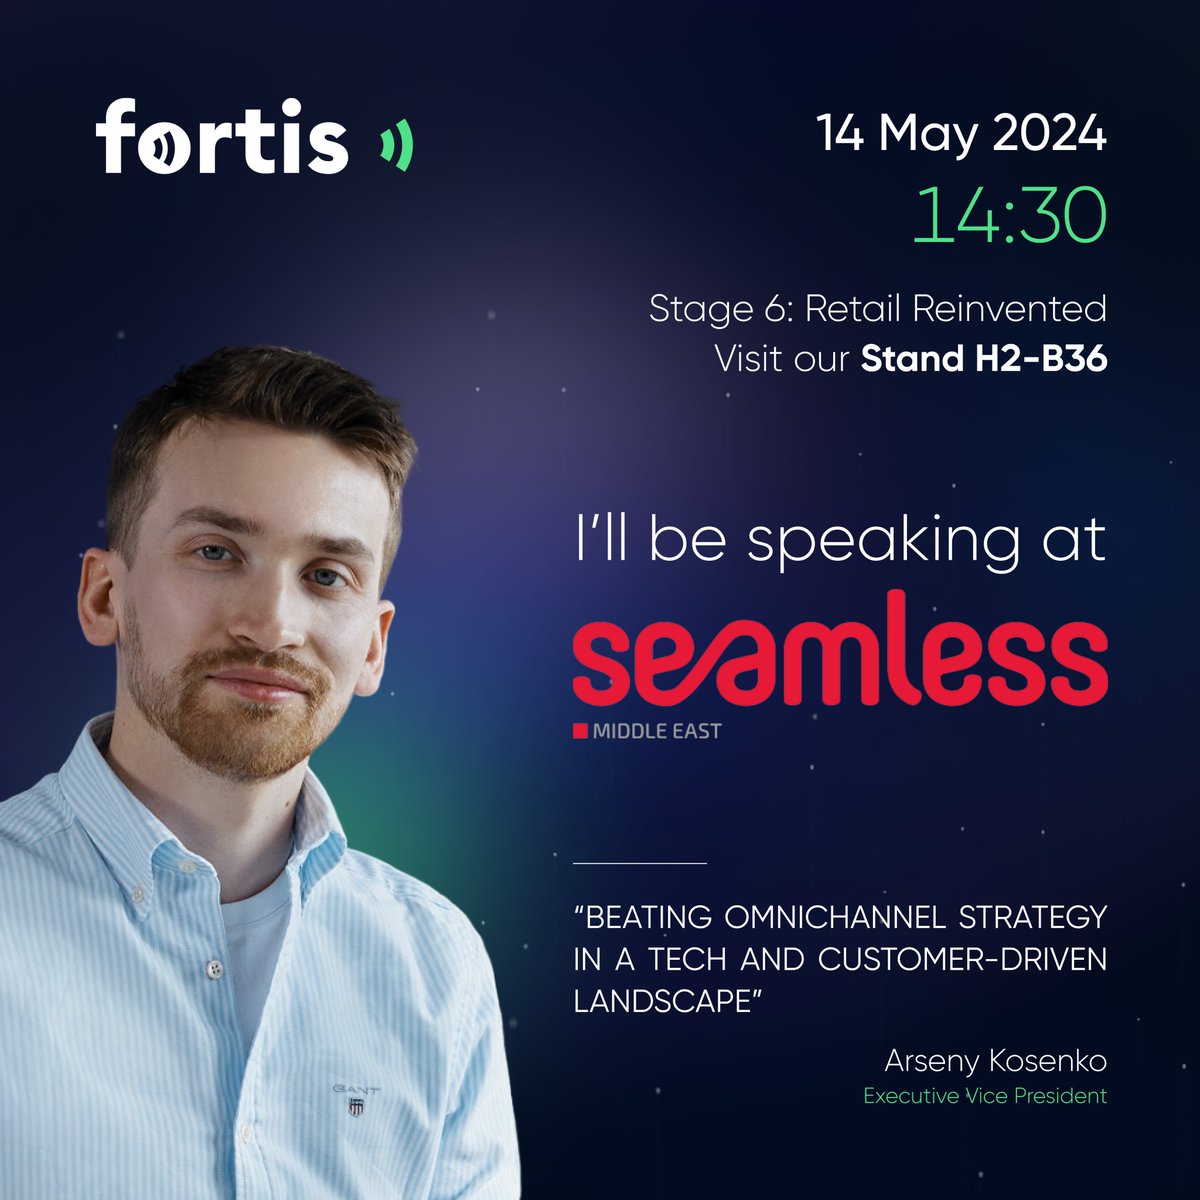 Our Executive VP Arseny Kosenko will join the exciting omnichannel panel speaking at Seamless on the 14th May.   Book your calendar for the 14th at 2.30pm, Stage 6 !  #Seamless #SeamlessDubai #Seamless2024 #SeamlessMiddleEast #SeamlessMiddleEast2024